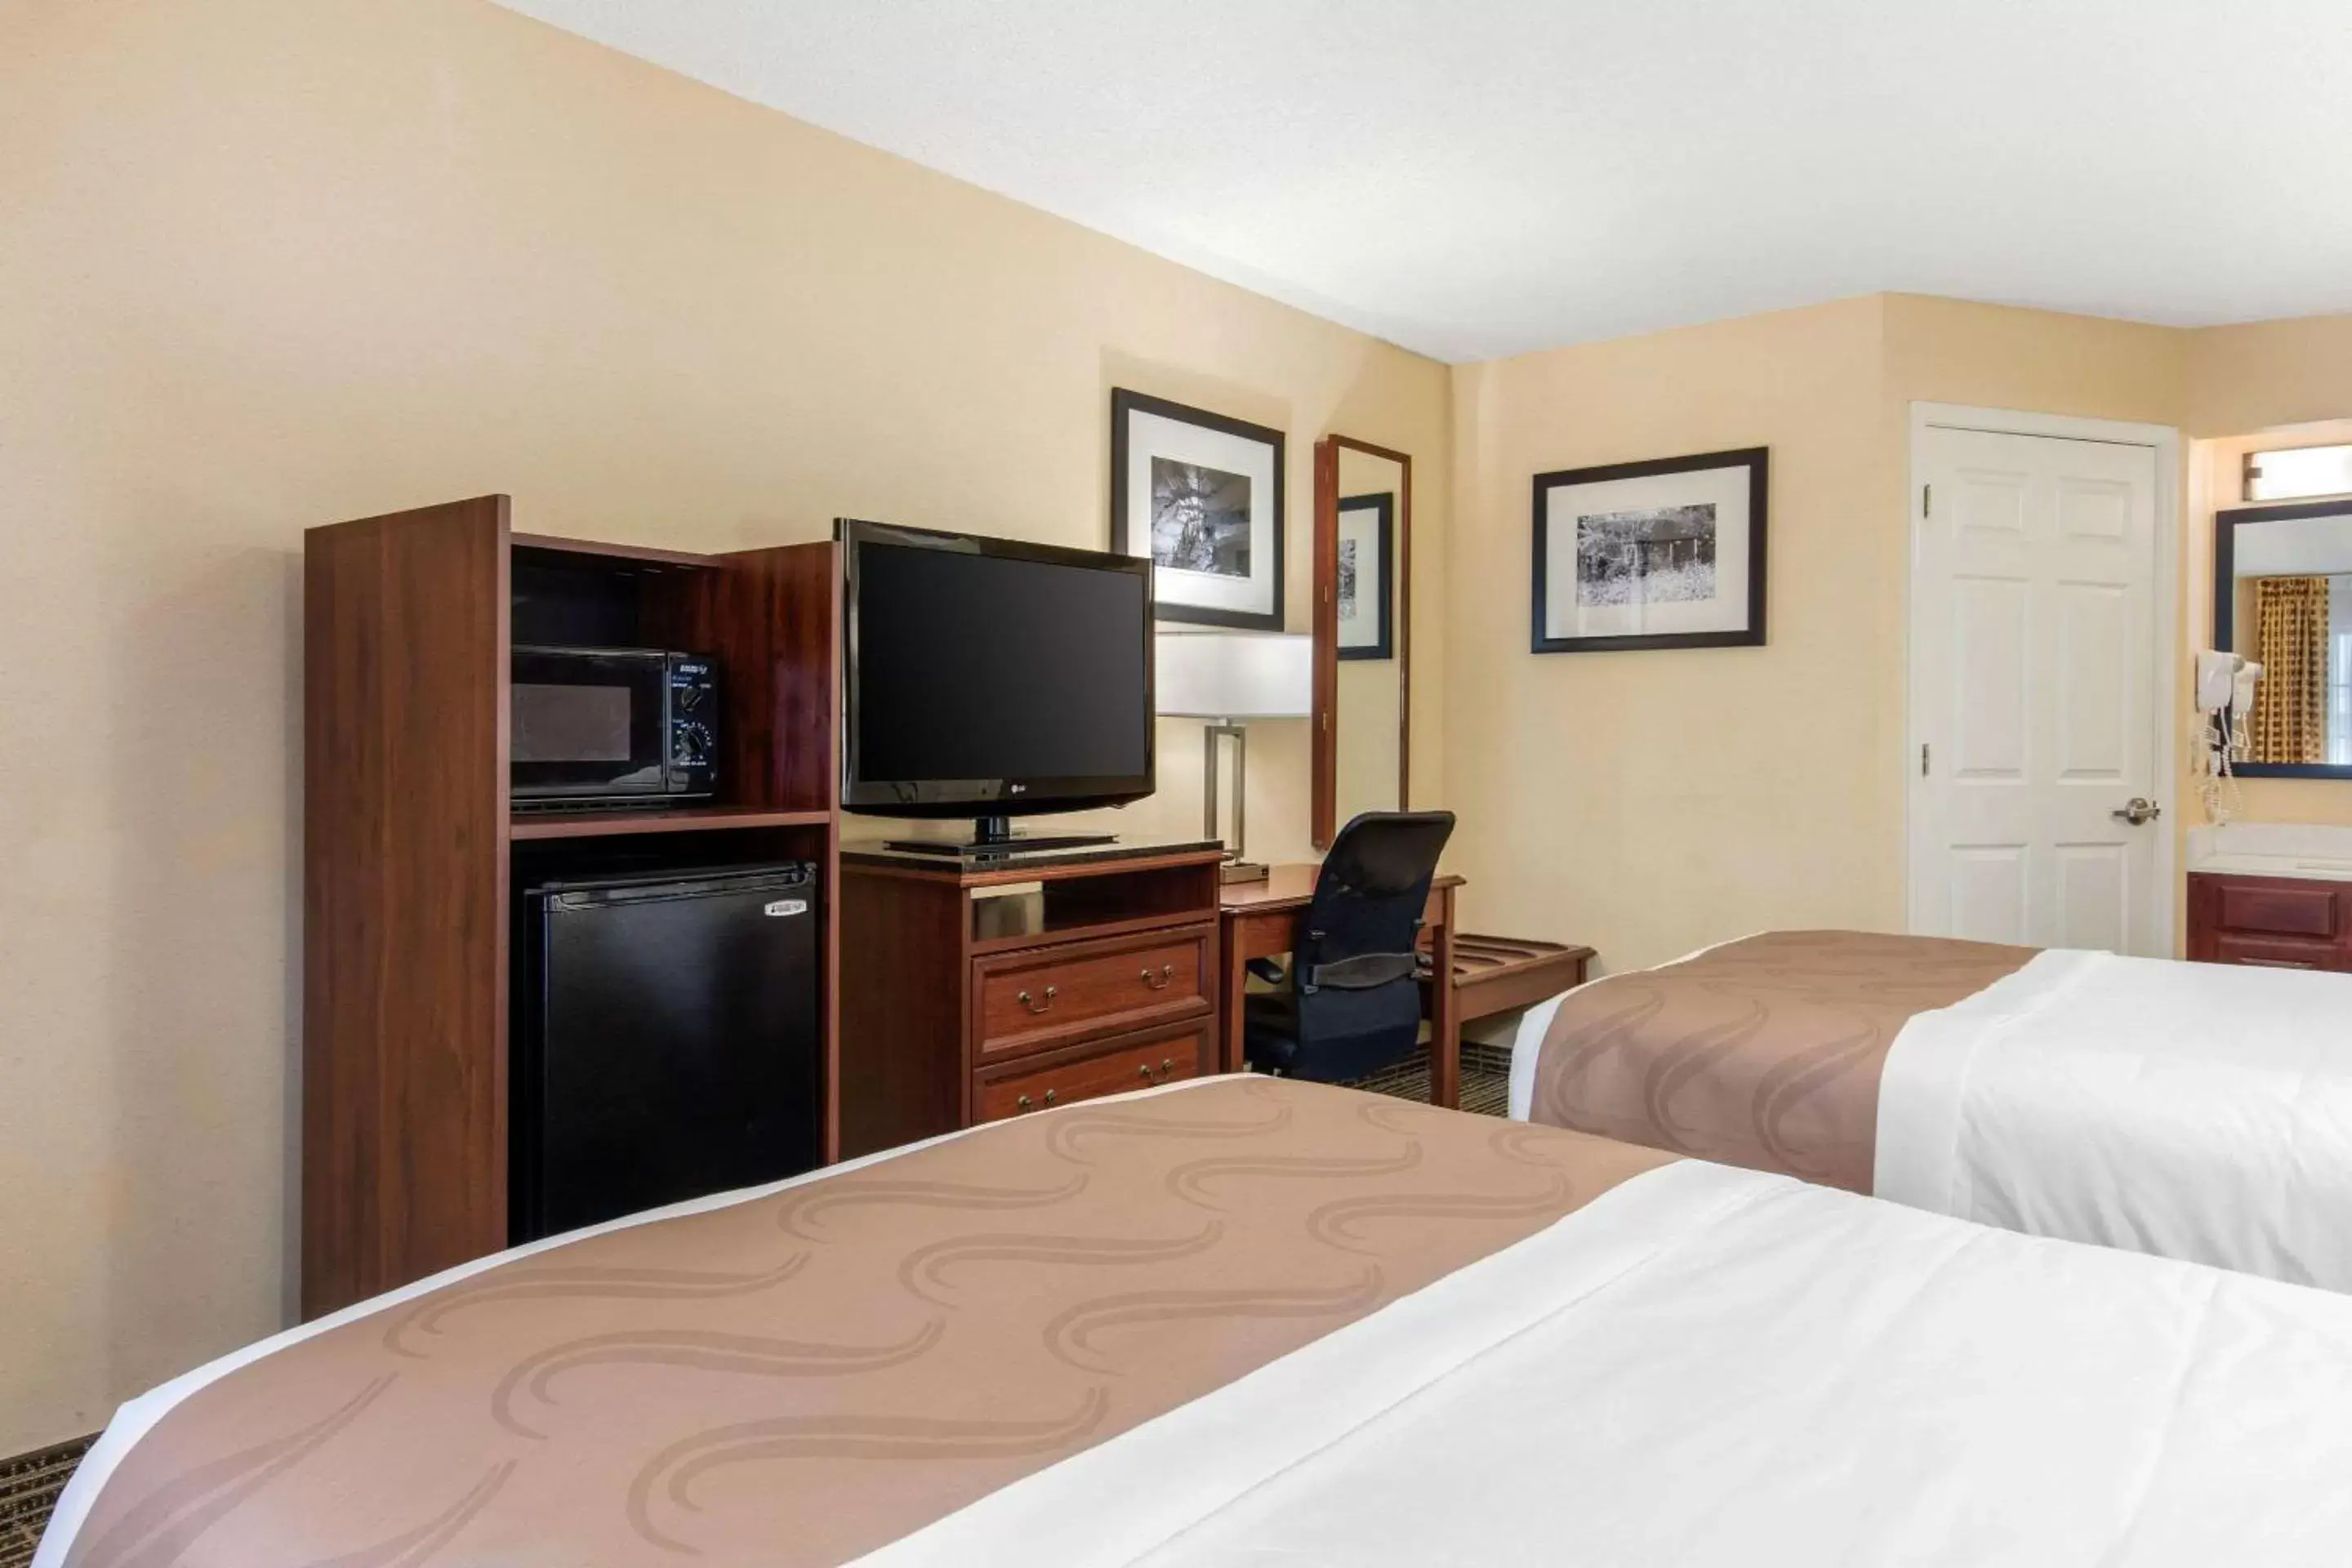 Standard Double Room with Two Double Beds - Smoking in Quality Inn Scottsboro US/72-Lake Guntersville Area